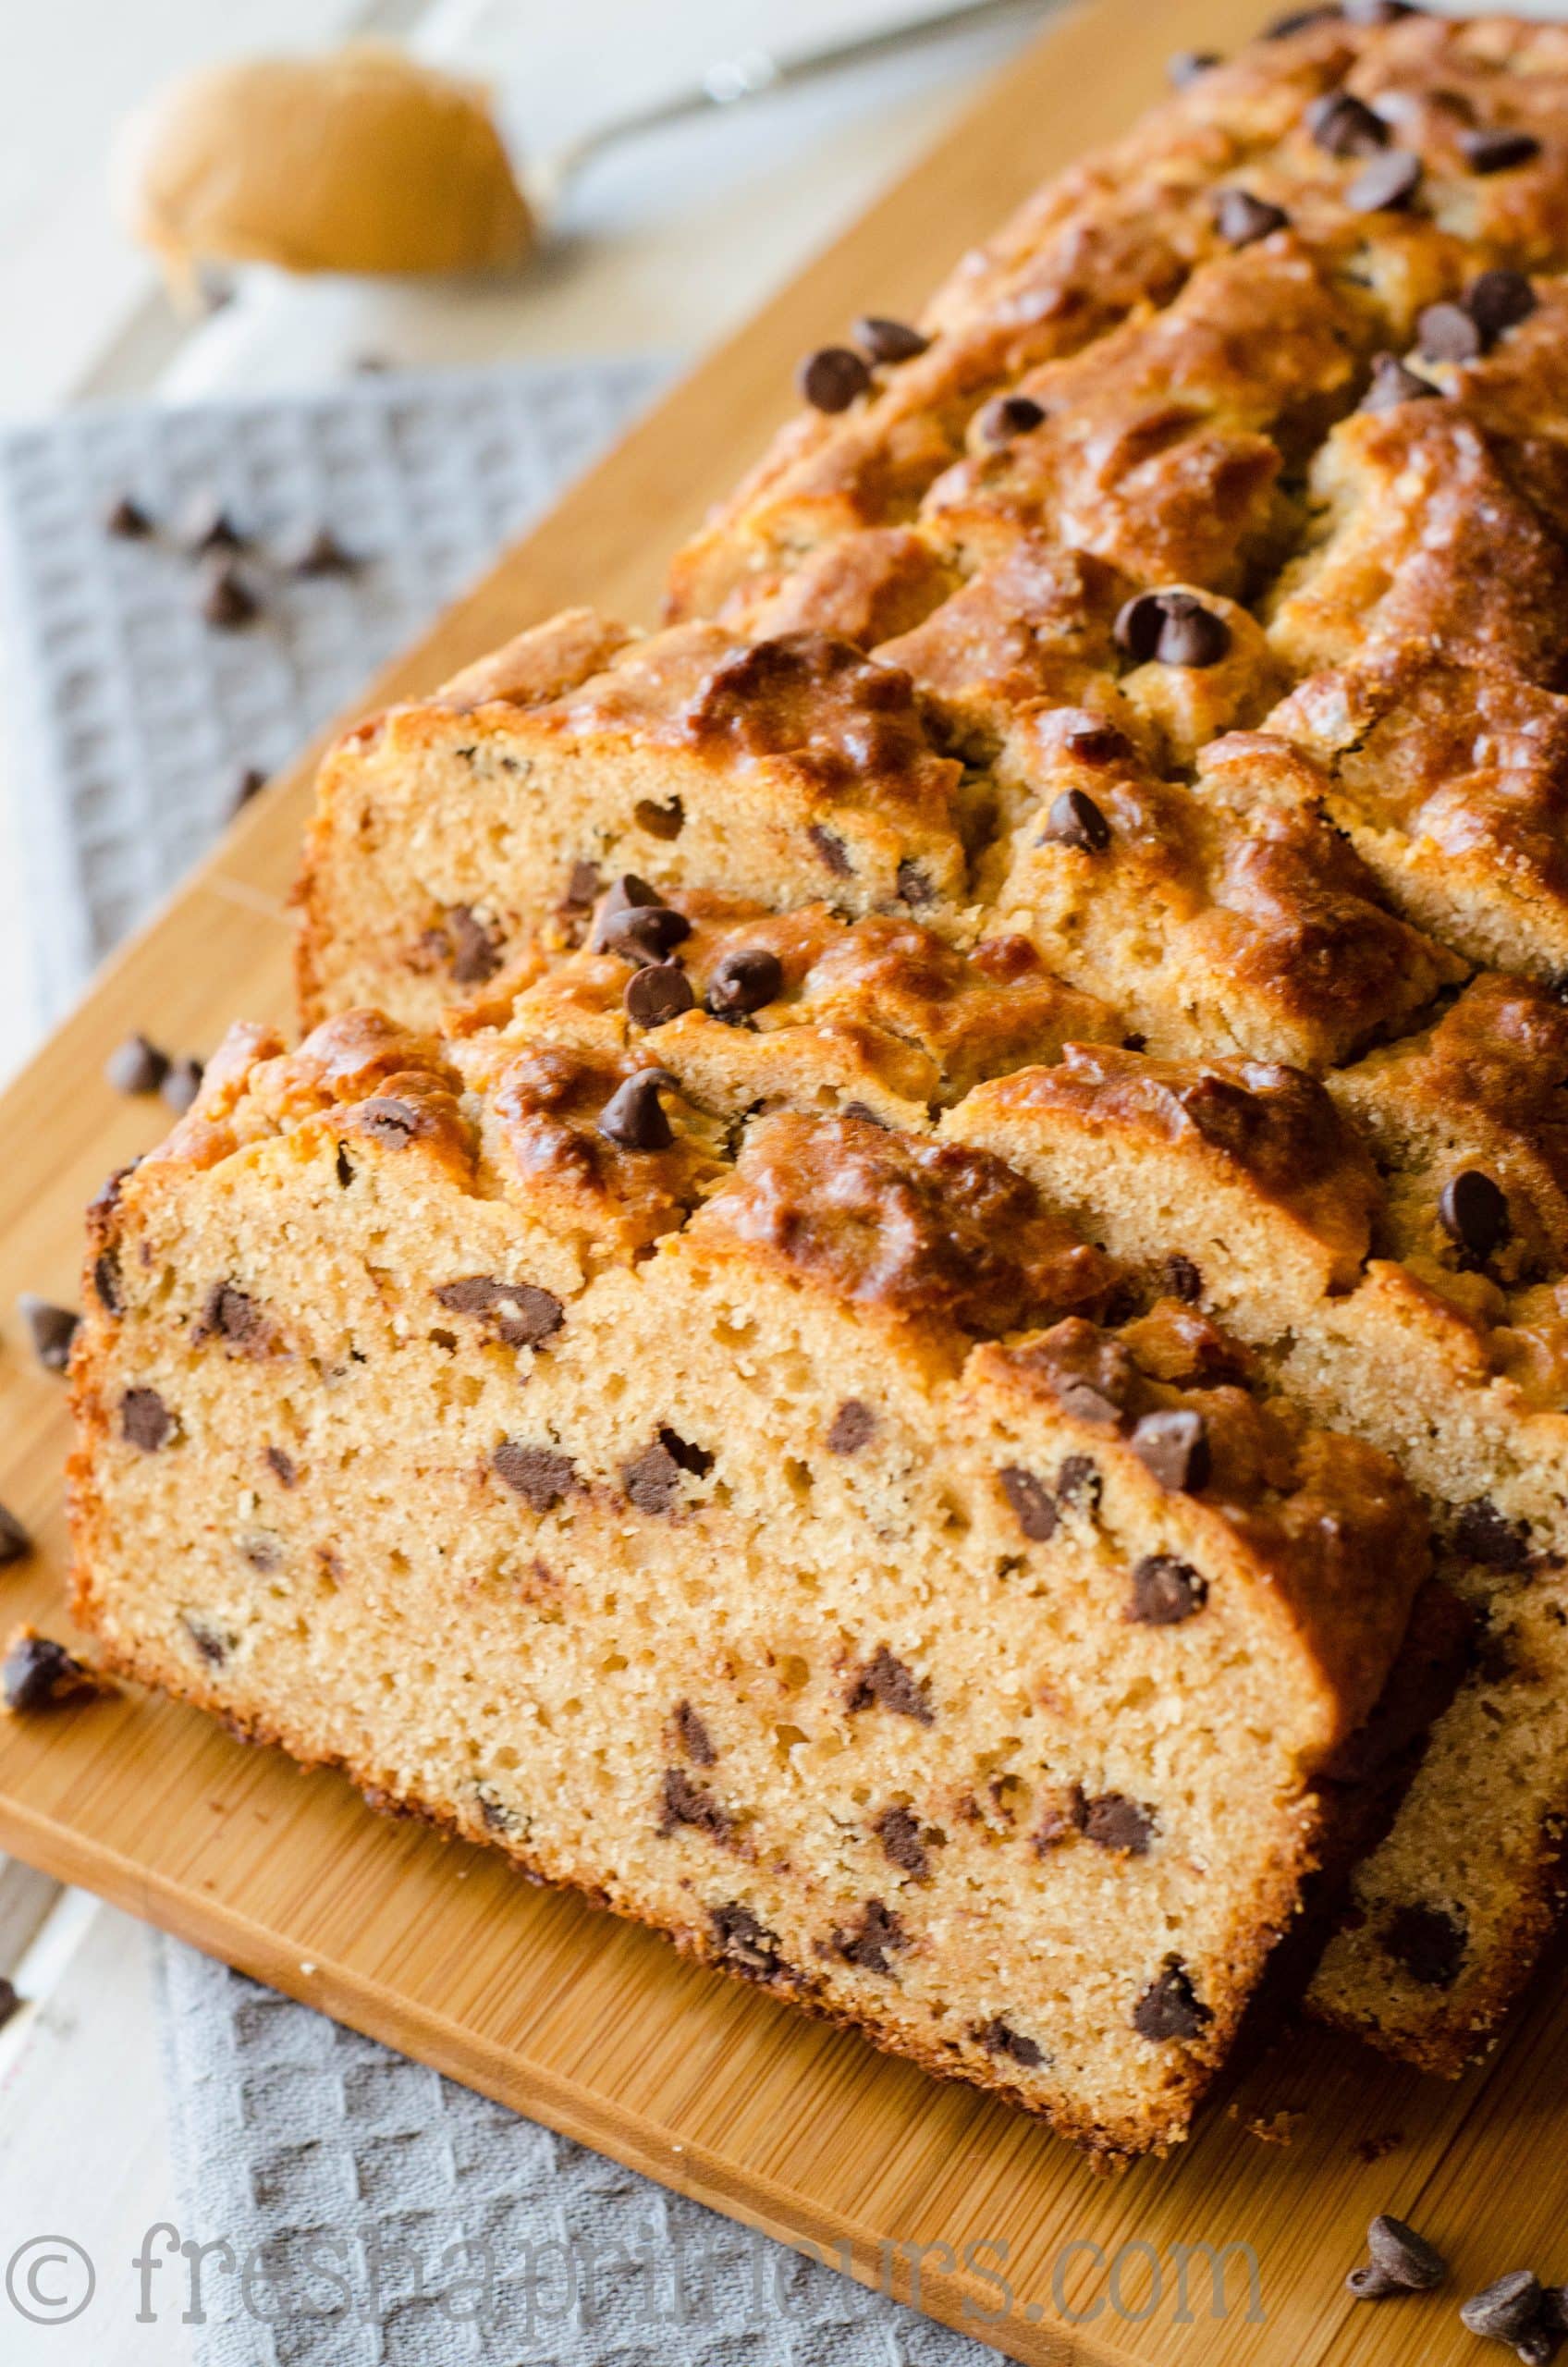 Chocolate Peanut Butter Bread: A crunchy exterior gives way to a moist and flavorful quick bread loaded with peanut butter and dotted with chocolate chips.